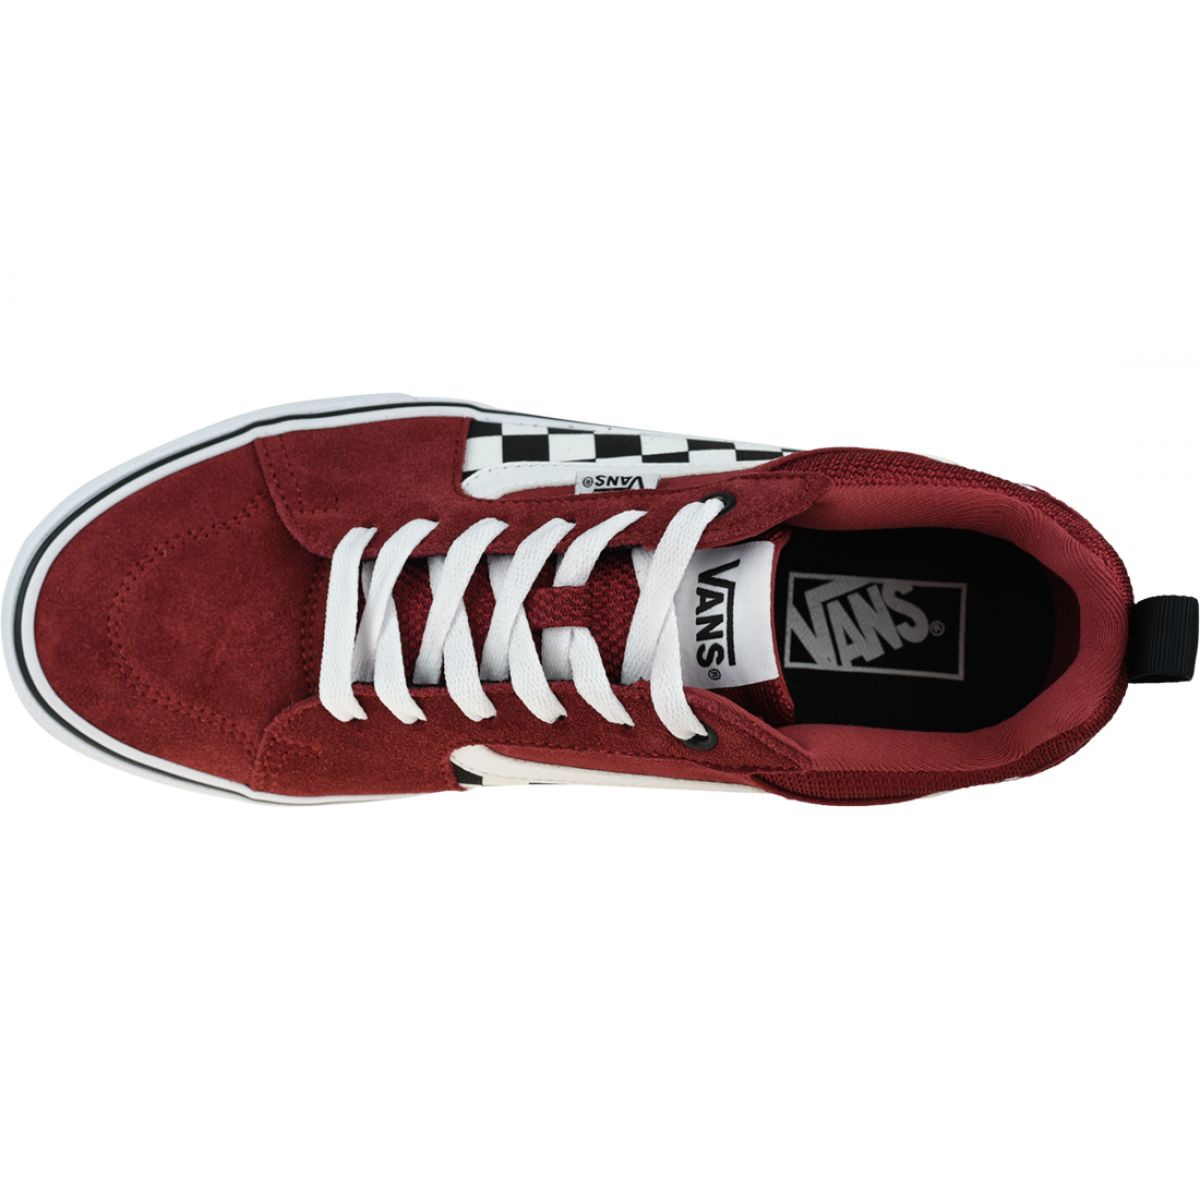 Vans Mn Filmore M VN0A3MTJW7O1 shoes red -